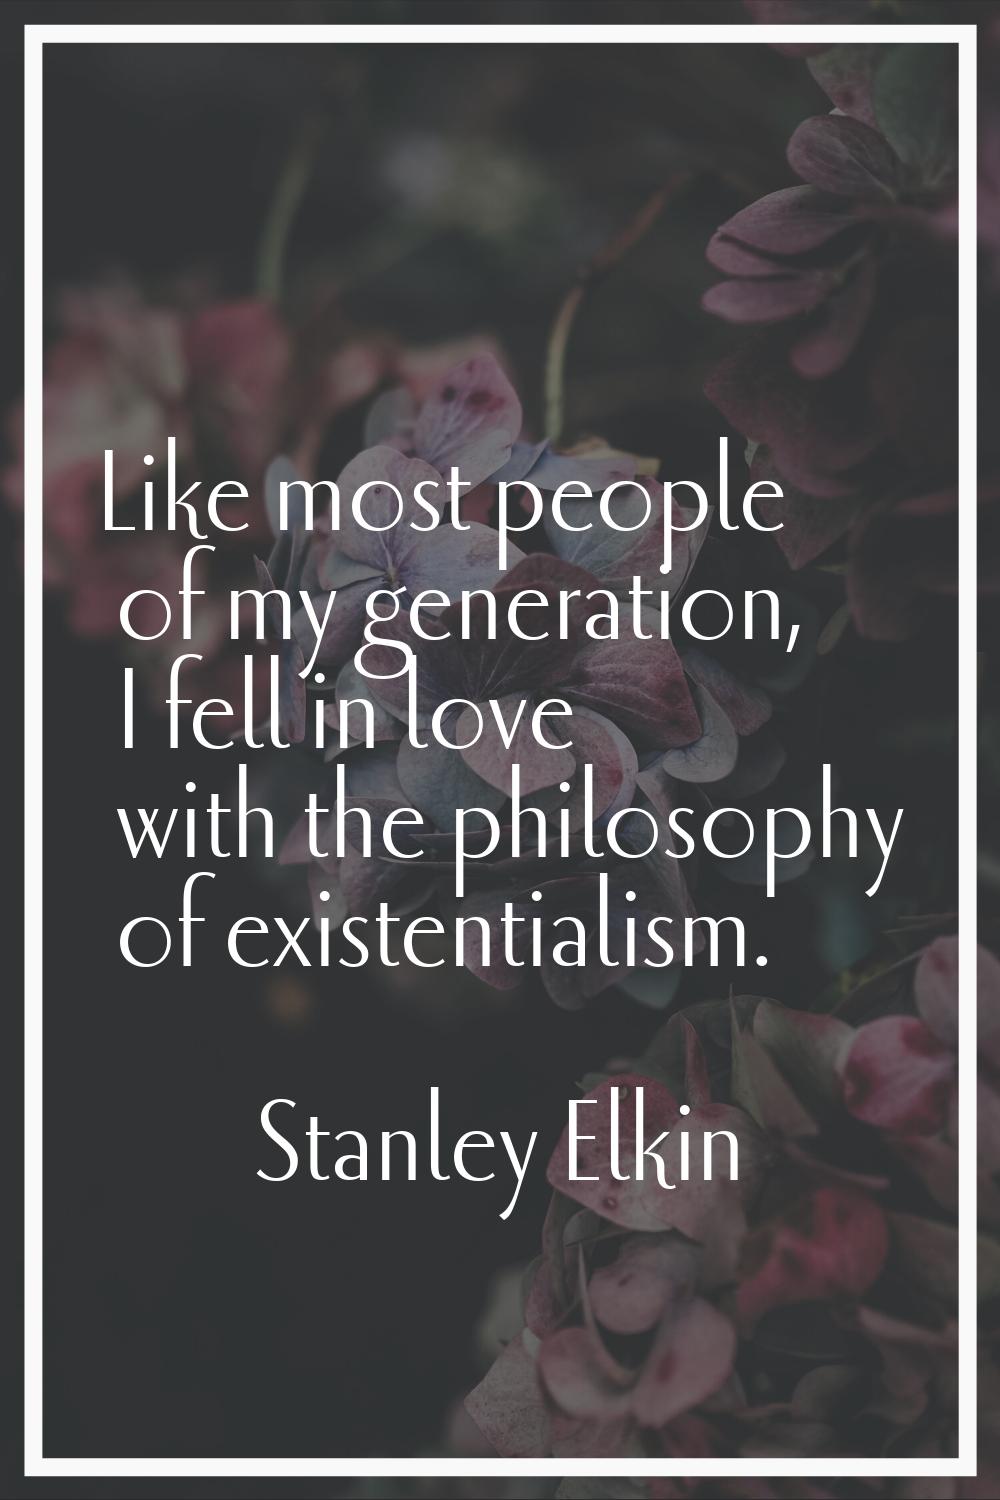 Like most people of my generation, I fell in love with the philosophy of existentialism.